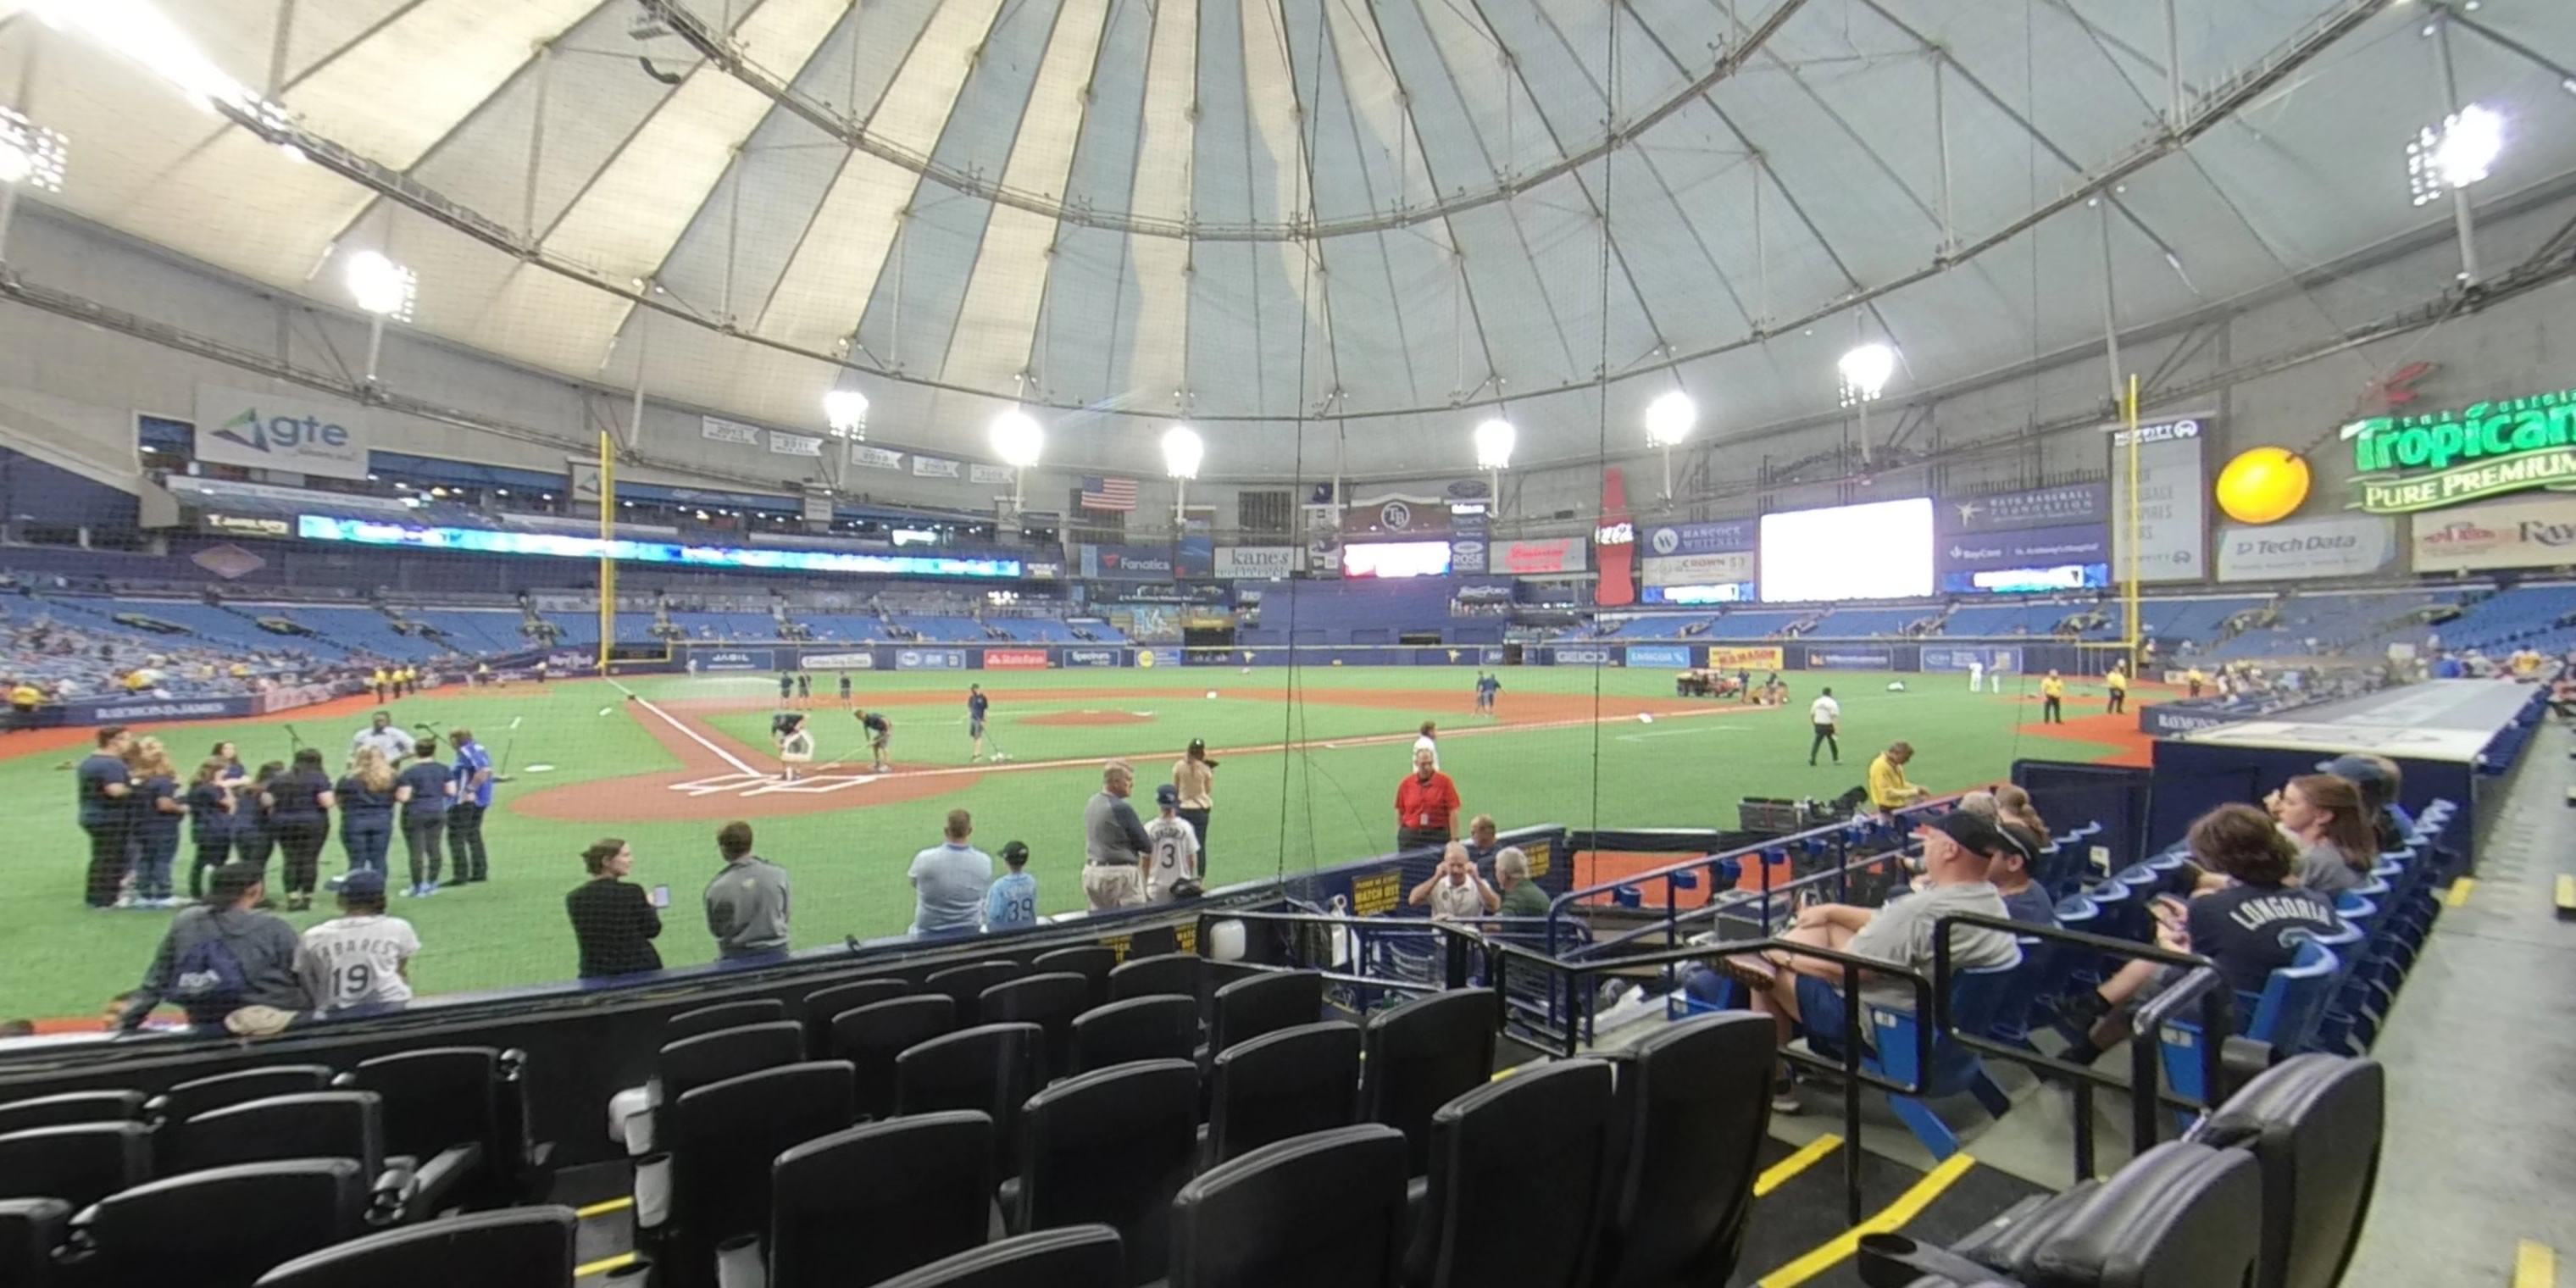 section 108 panoramic seat view  for baseball - tropicana field